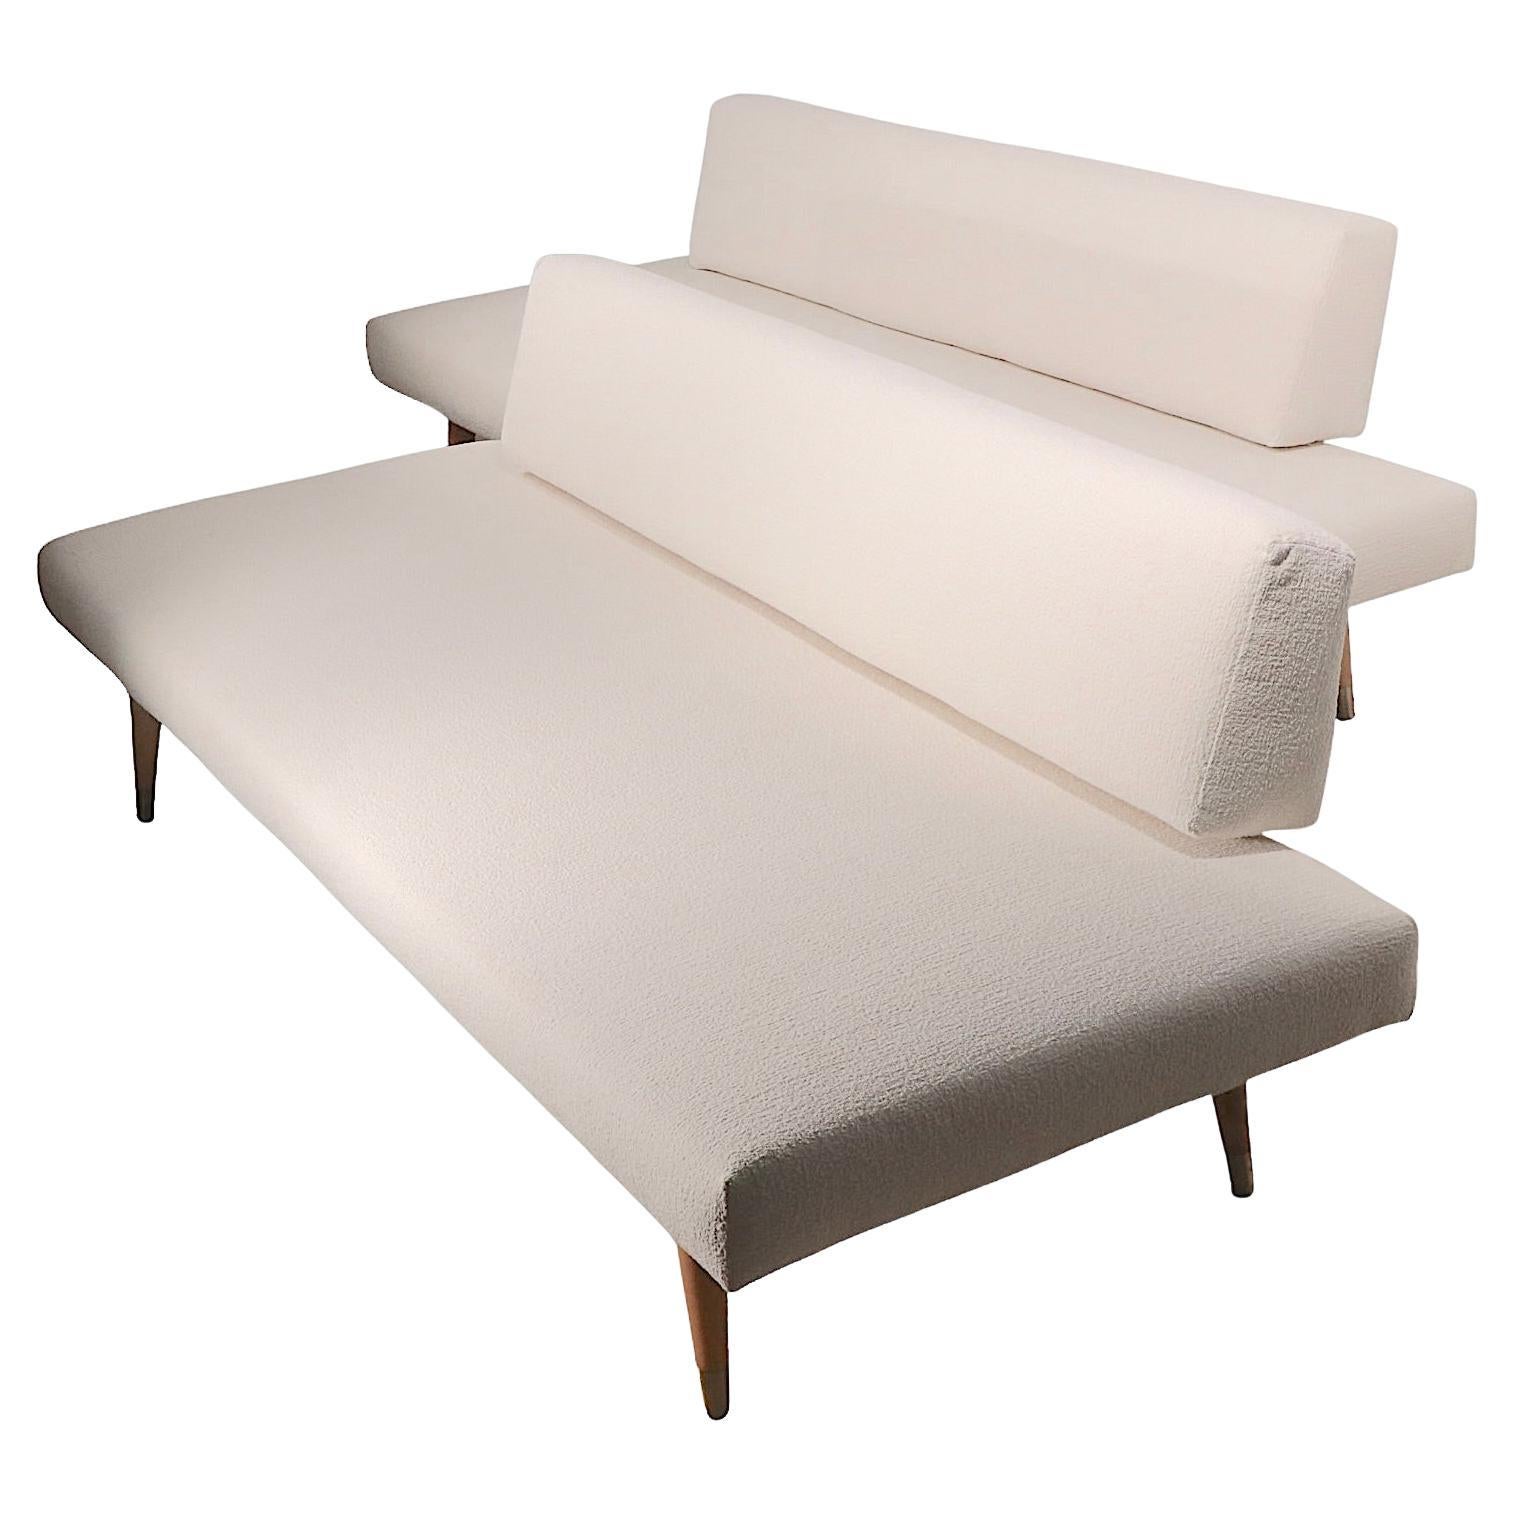 Pr. Mid Century Daybeds Newly Upholstered in Off White Boucle Fabric, c. 1950's